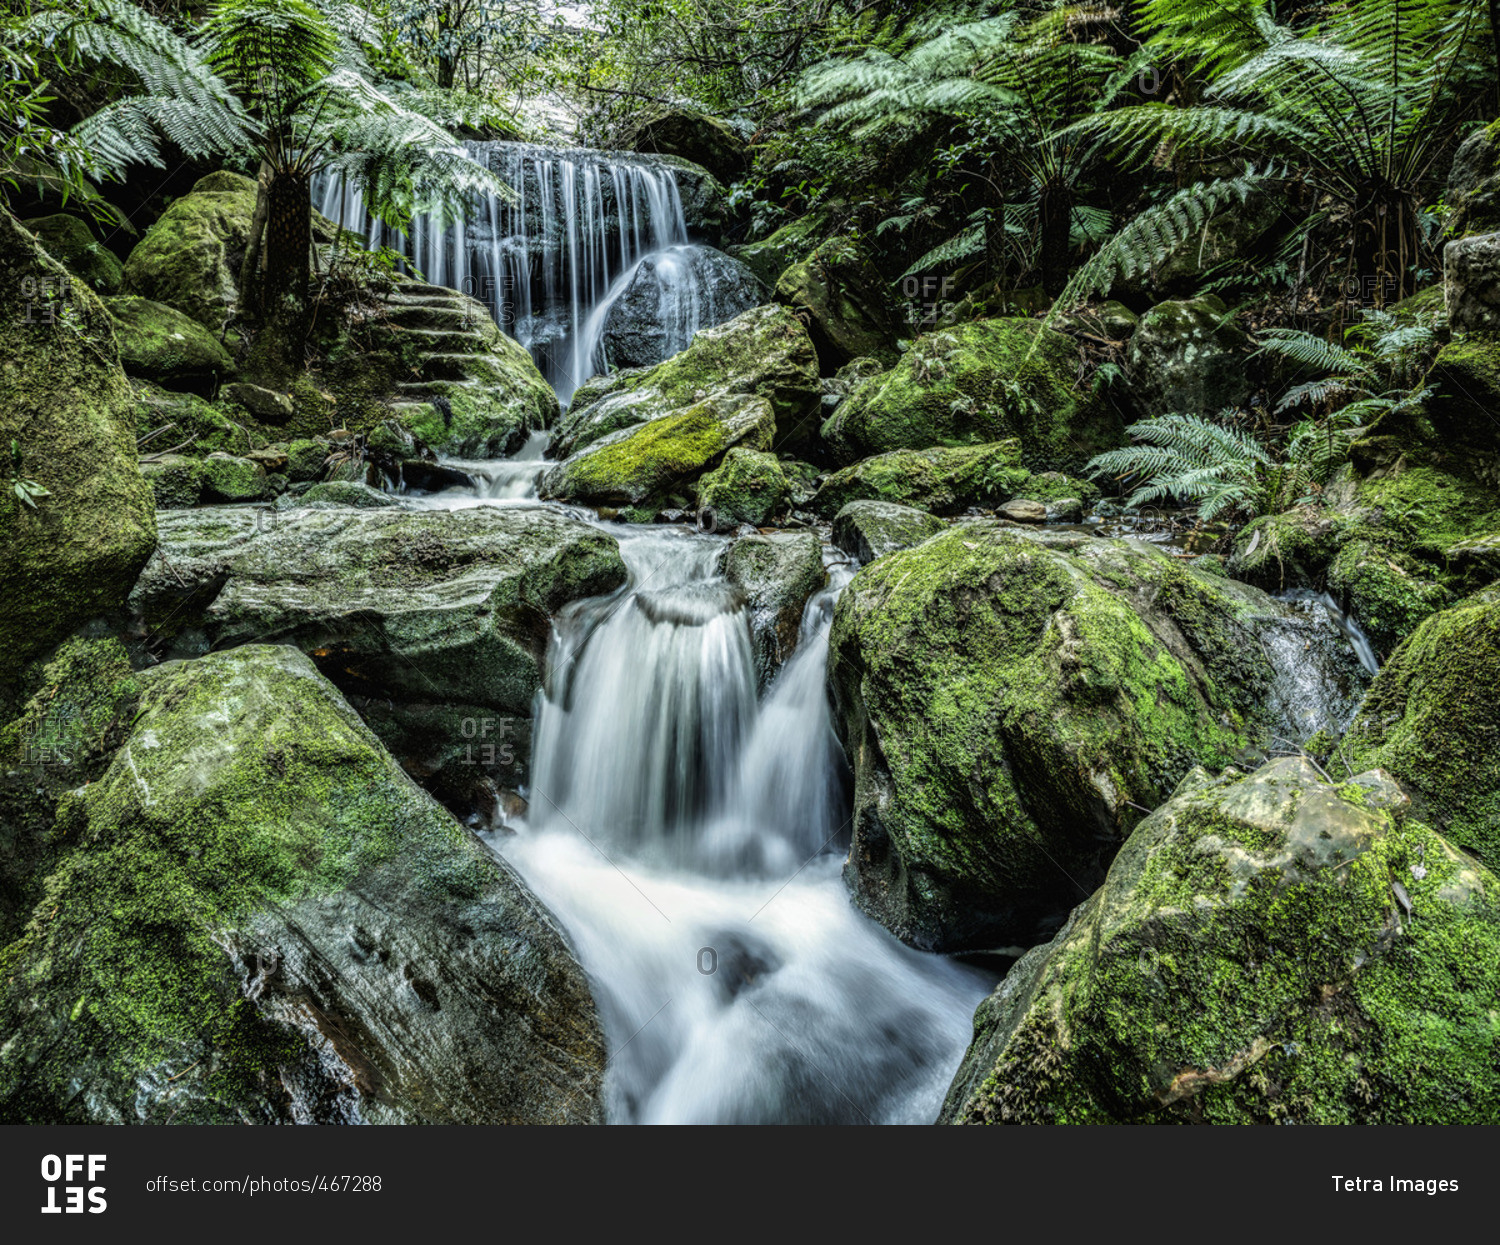 Australia, New South Wales, Katoomba, Leura Cascade in forest